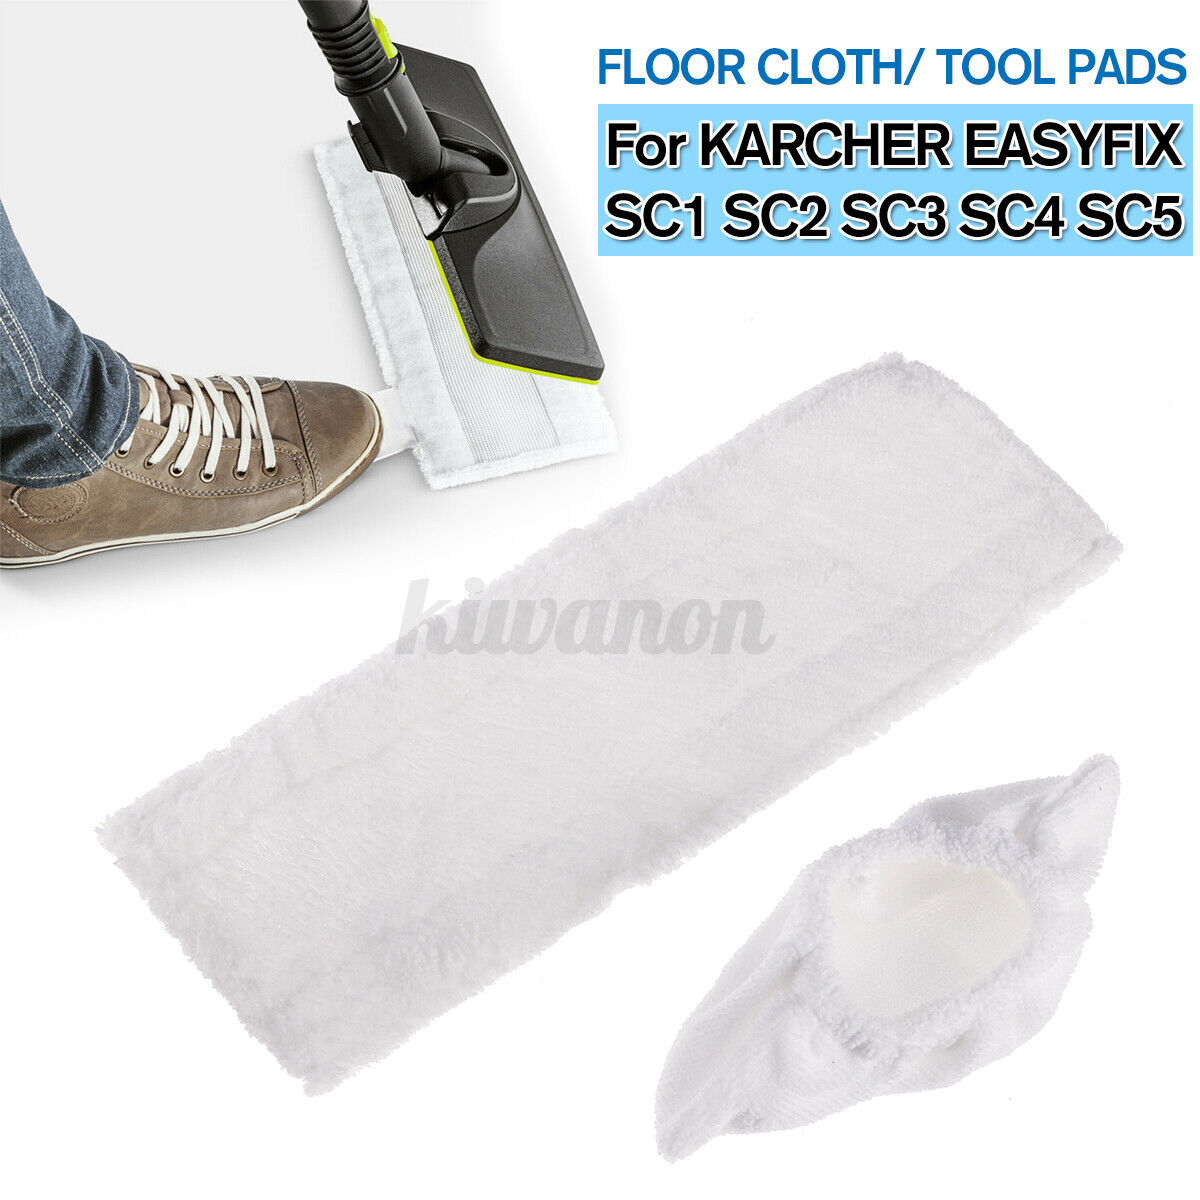 Steam Cleaner Floor Cloth/Tool Pad for KARCHER EASYFIX SC1 SC2 S